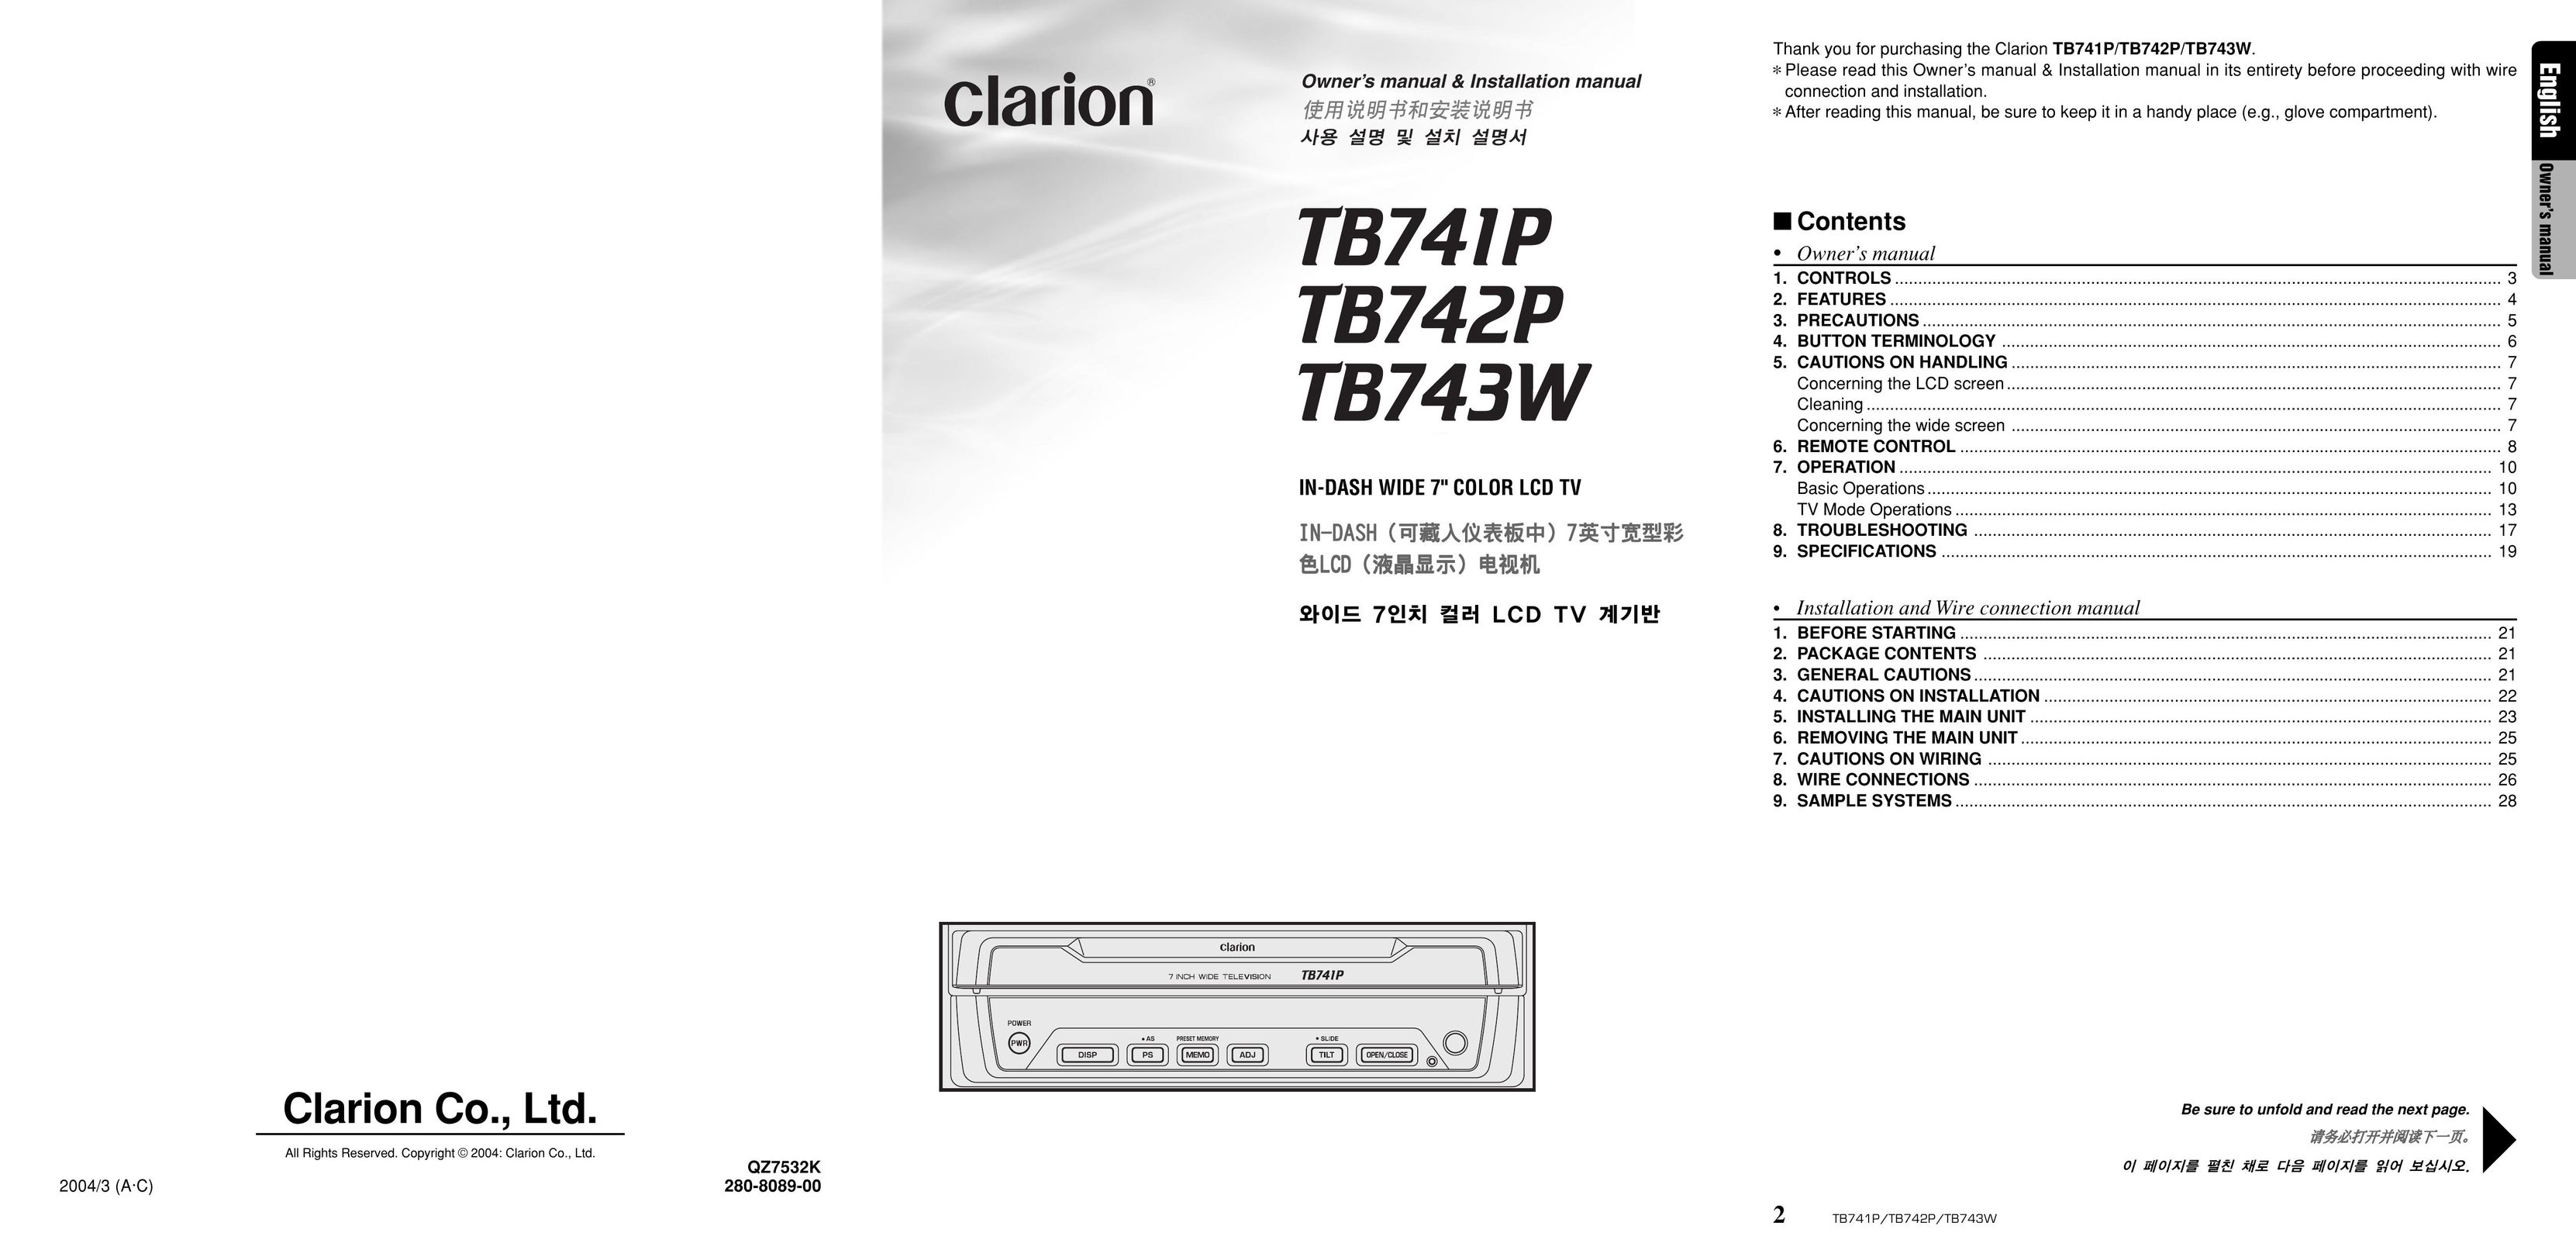 Clarion TB741P Flat Panel Television User Manual